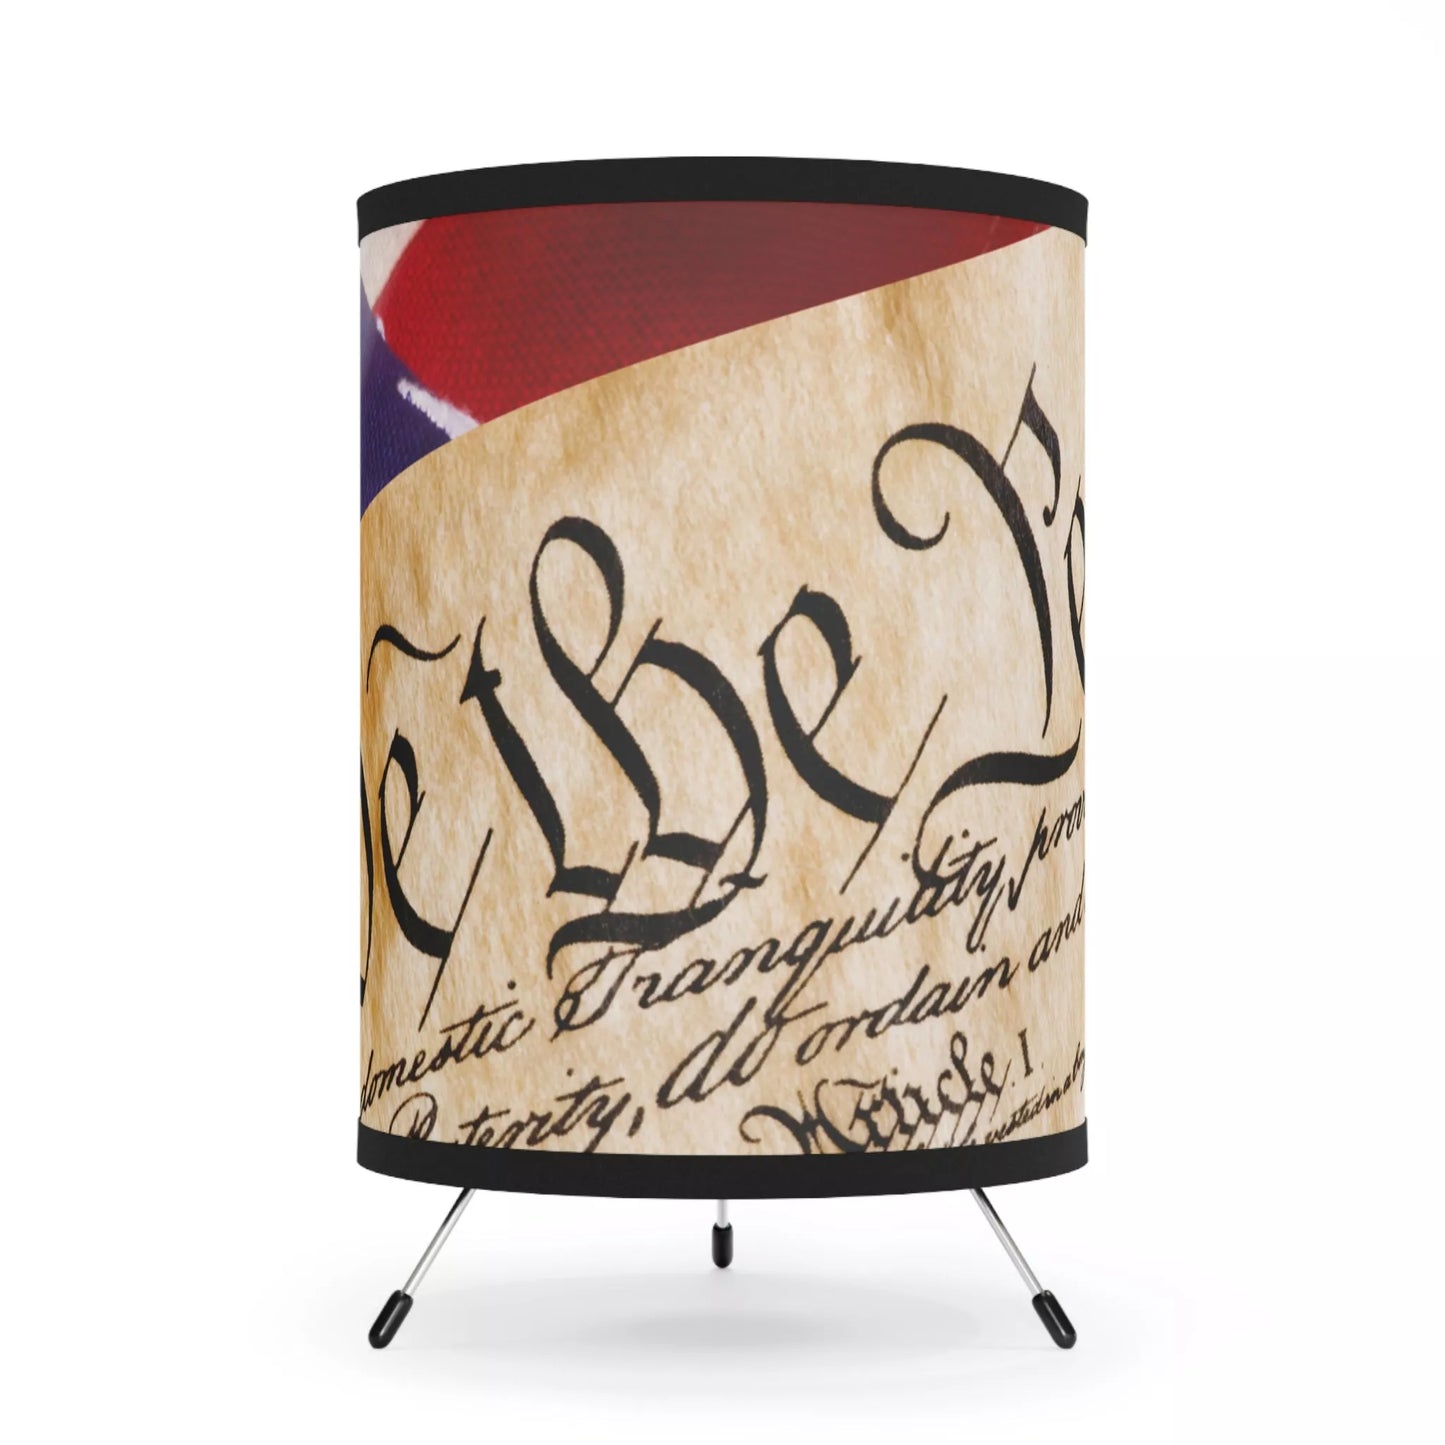 We The People Constitution Tripod Lamp with High-Res Printed Shade, US\CA plug